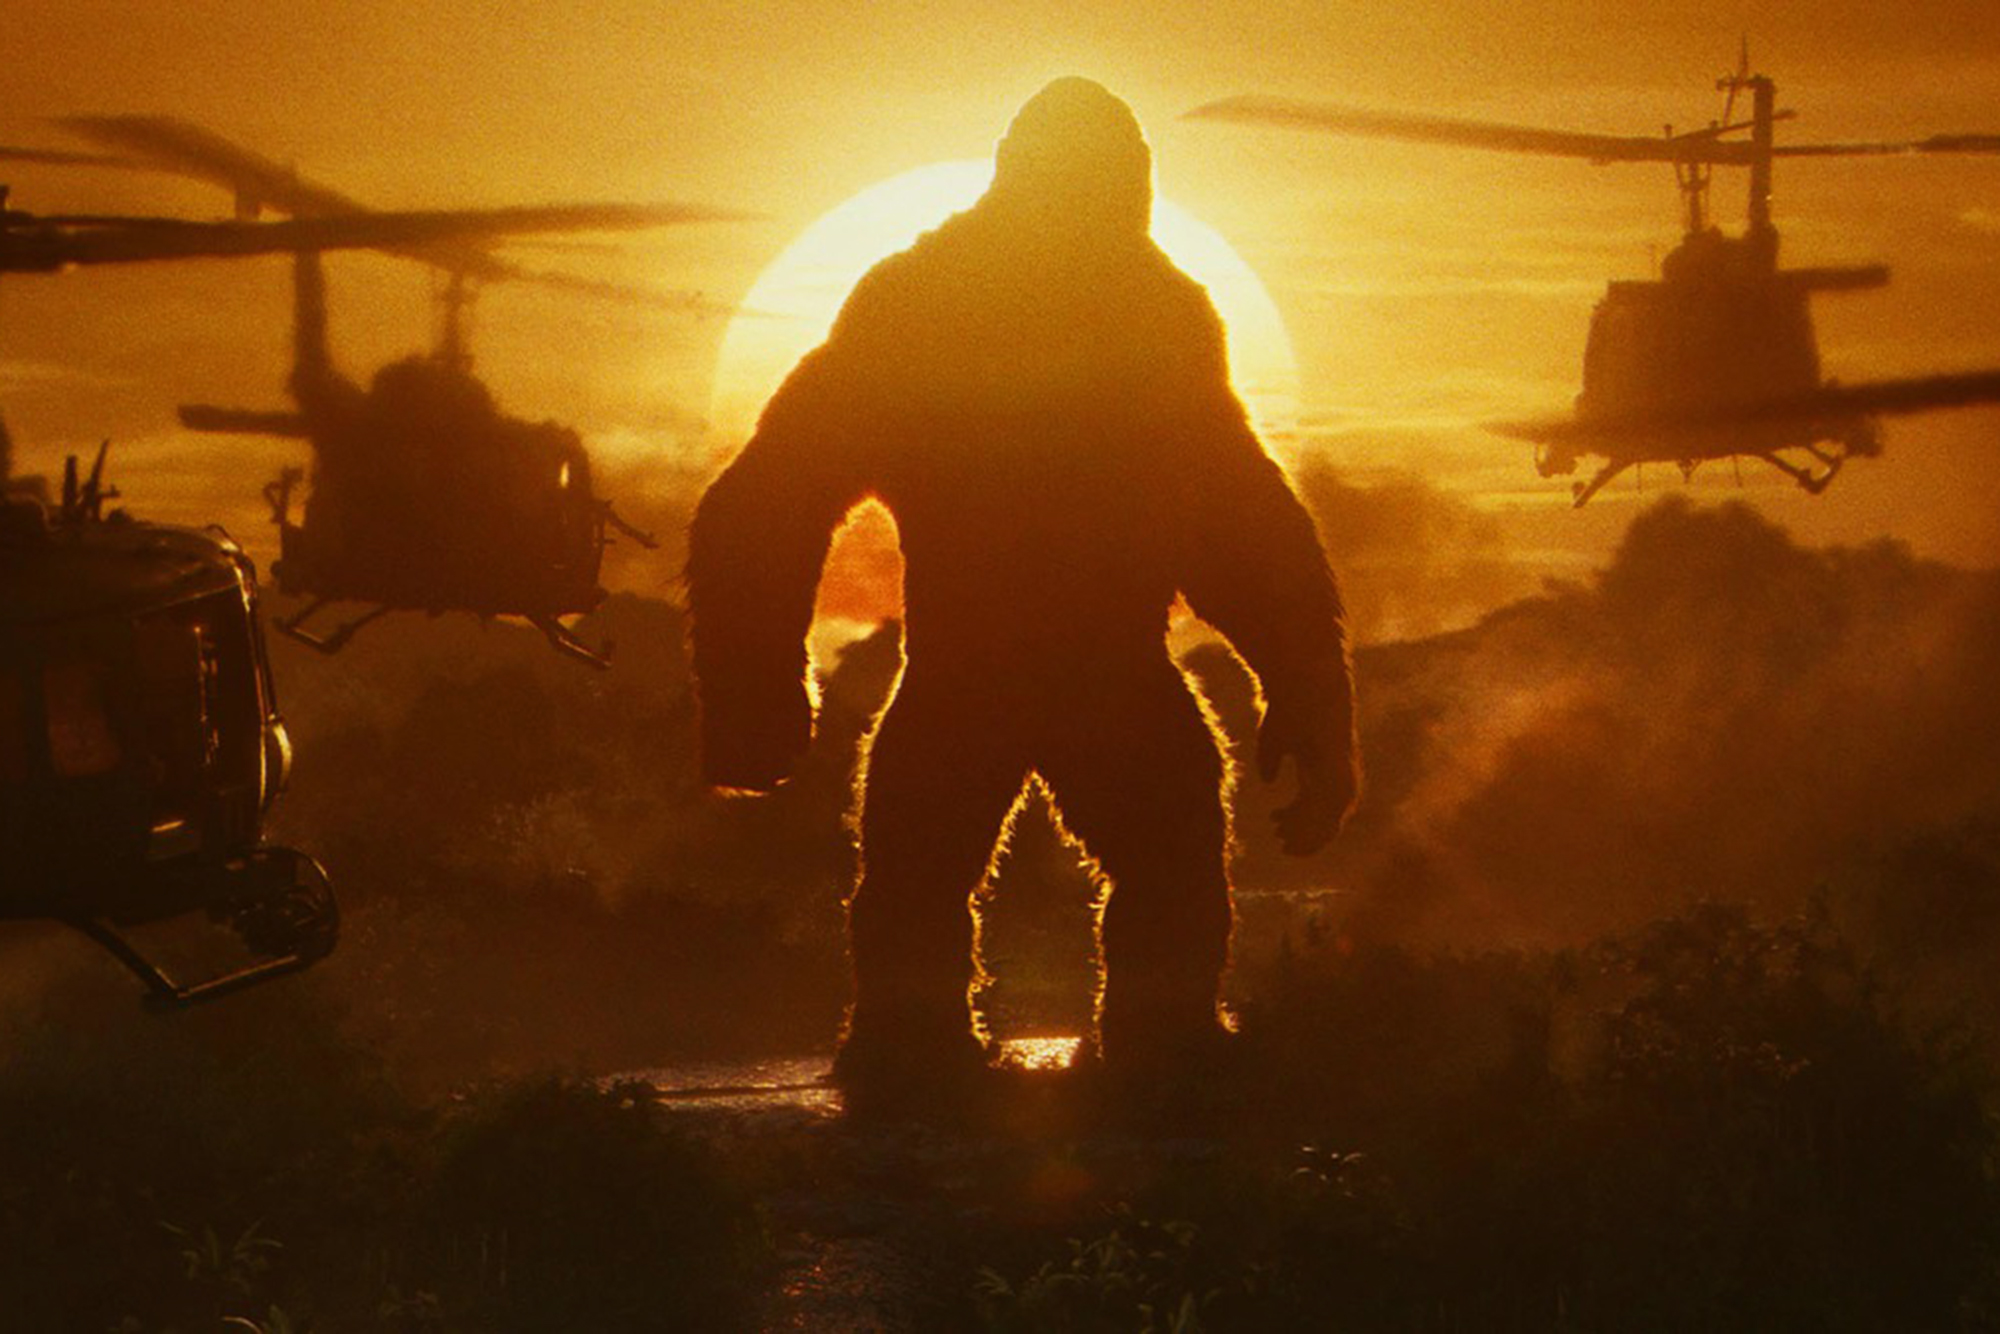 The new Kong is a throwback to the 1933 version, visually referencing that movie's classic monster look. Though motion-capture sessions contributed to his visage, the 100-ft. monster came to life through computer animation. The biggest challenge: his fur. Animators spent a year designing his 19 million digital hairs.